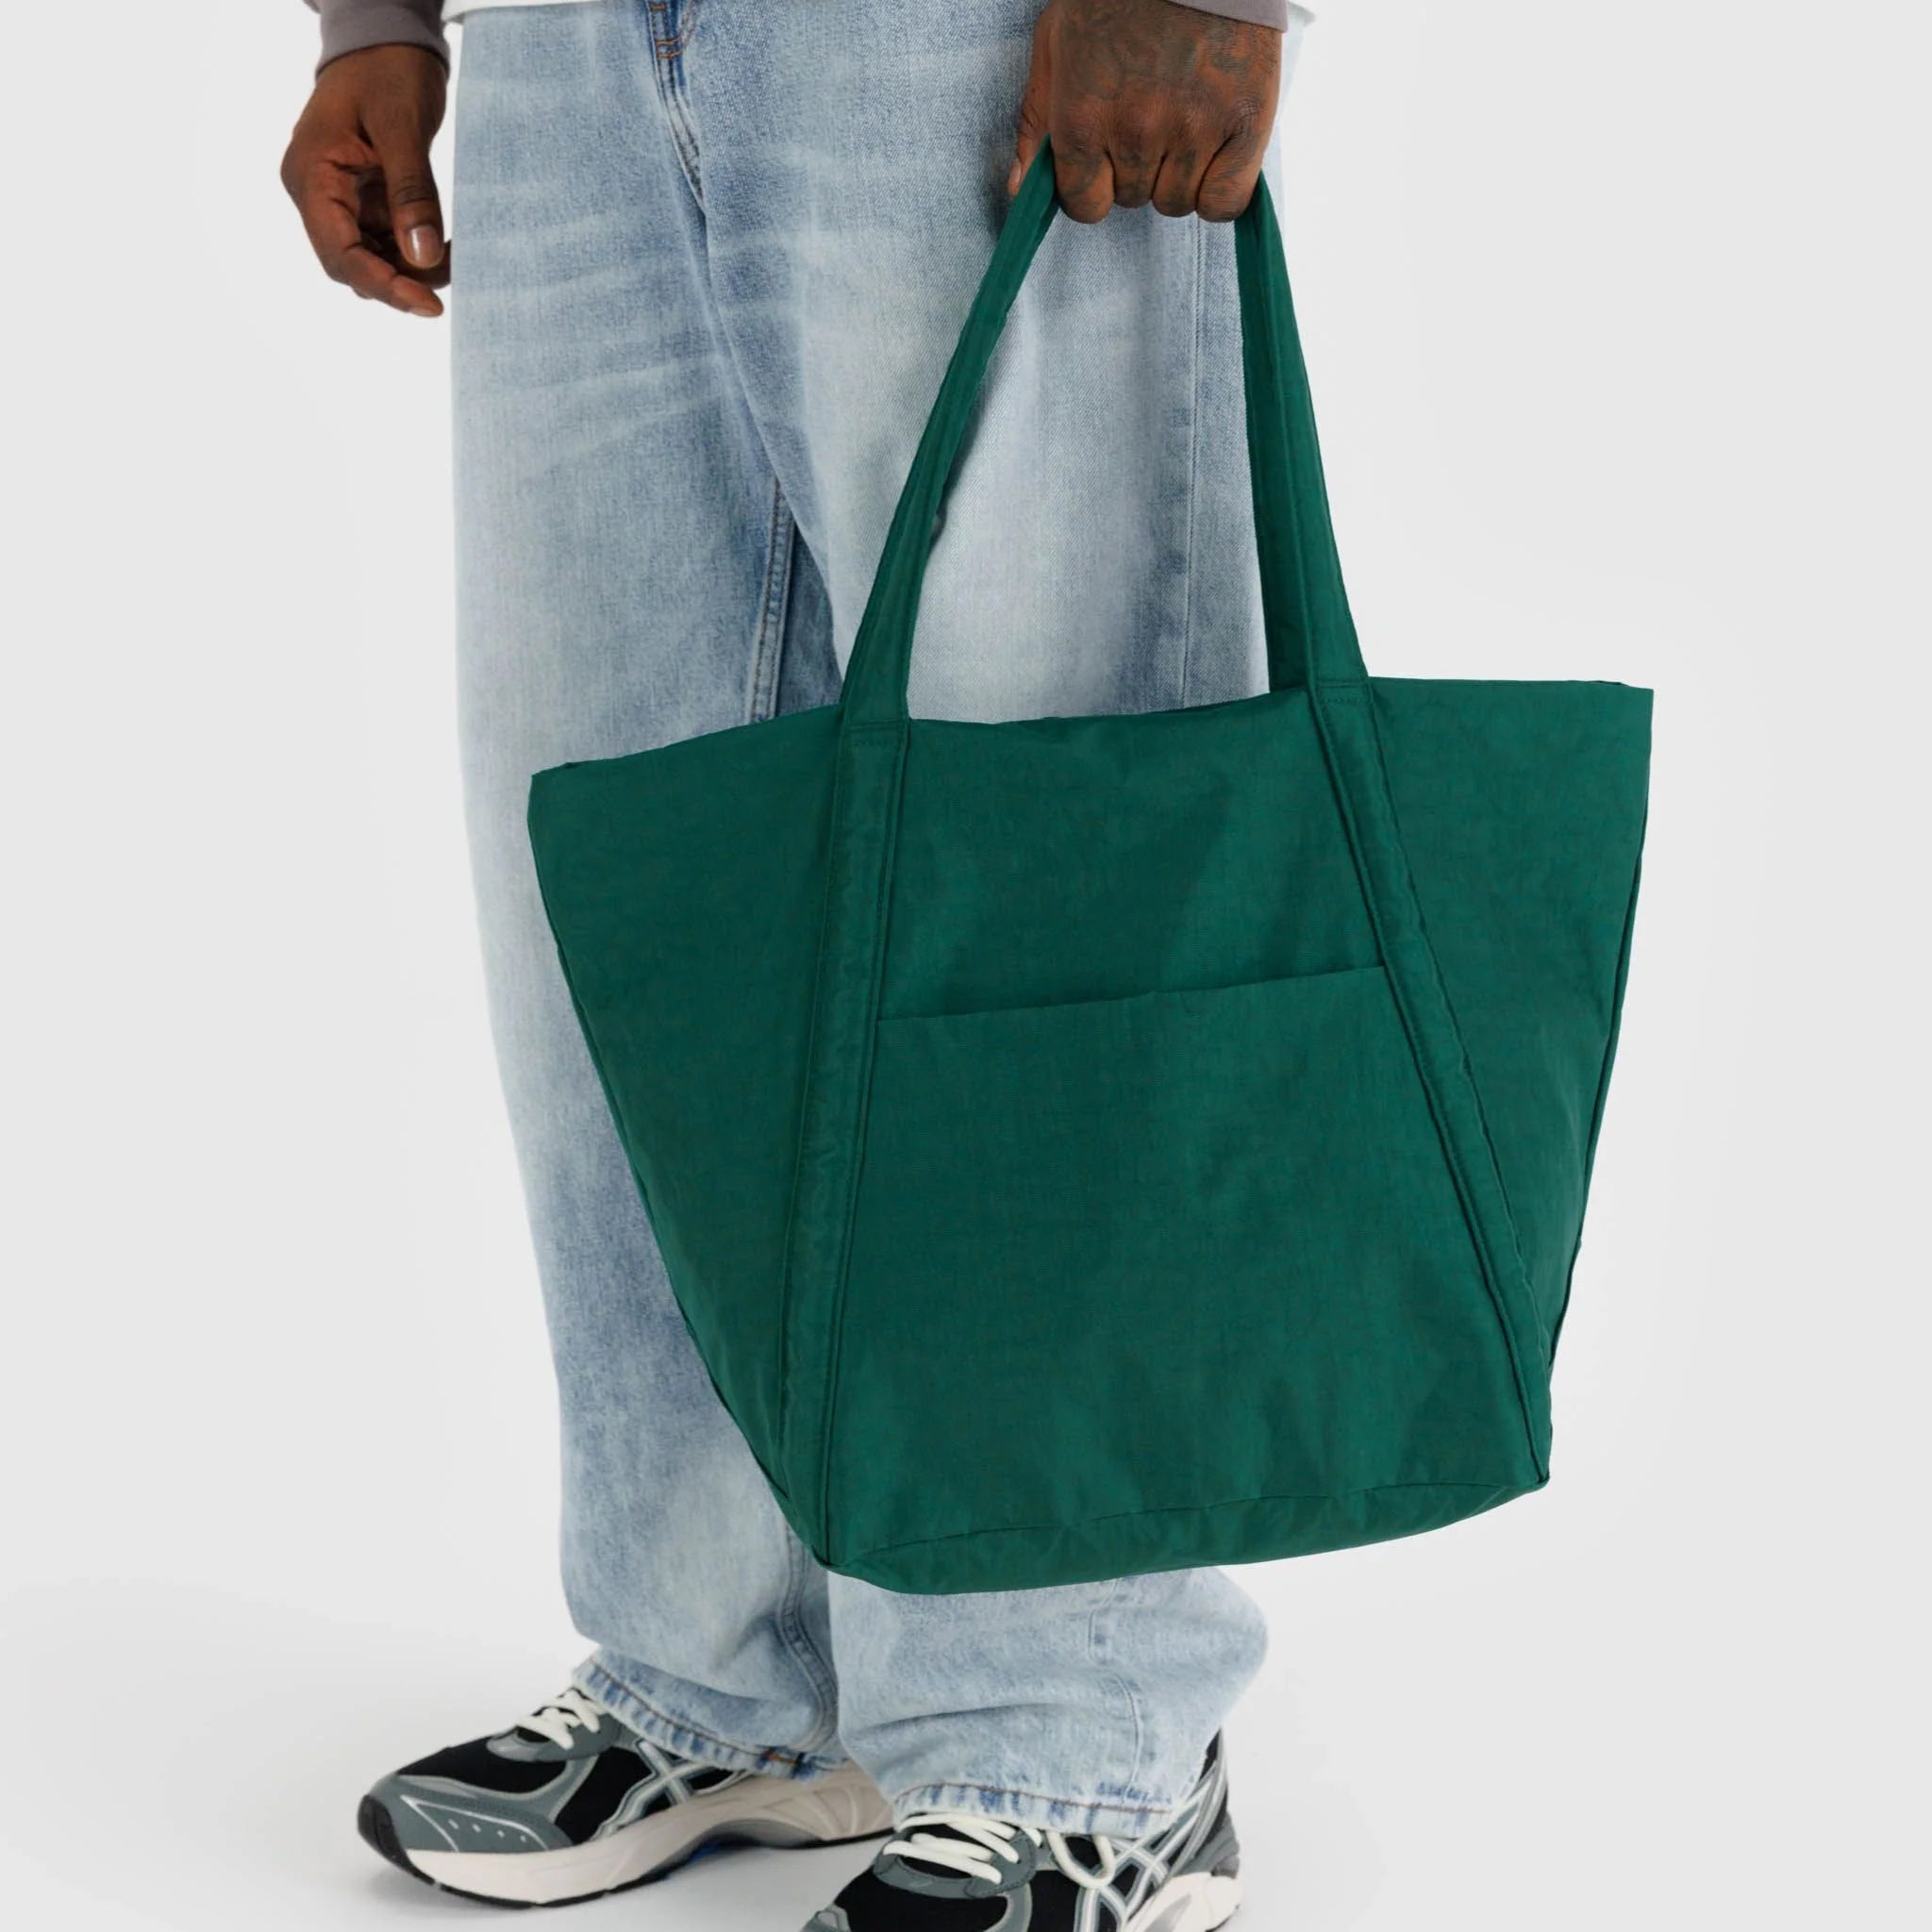 A dark green nylon tote bag with two hand straps and a front pocket. 